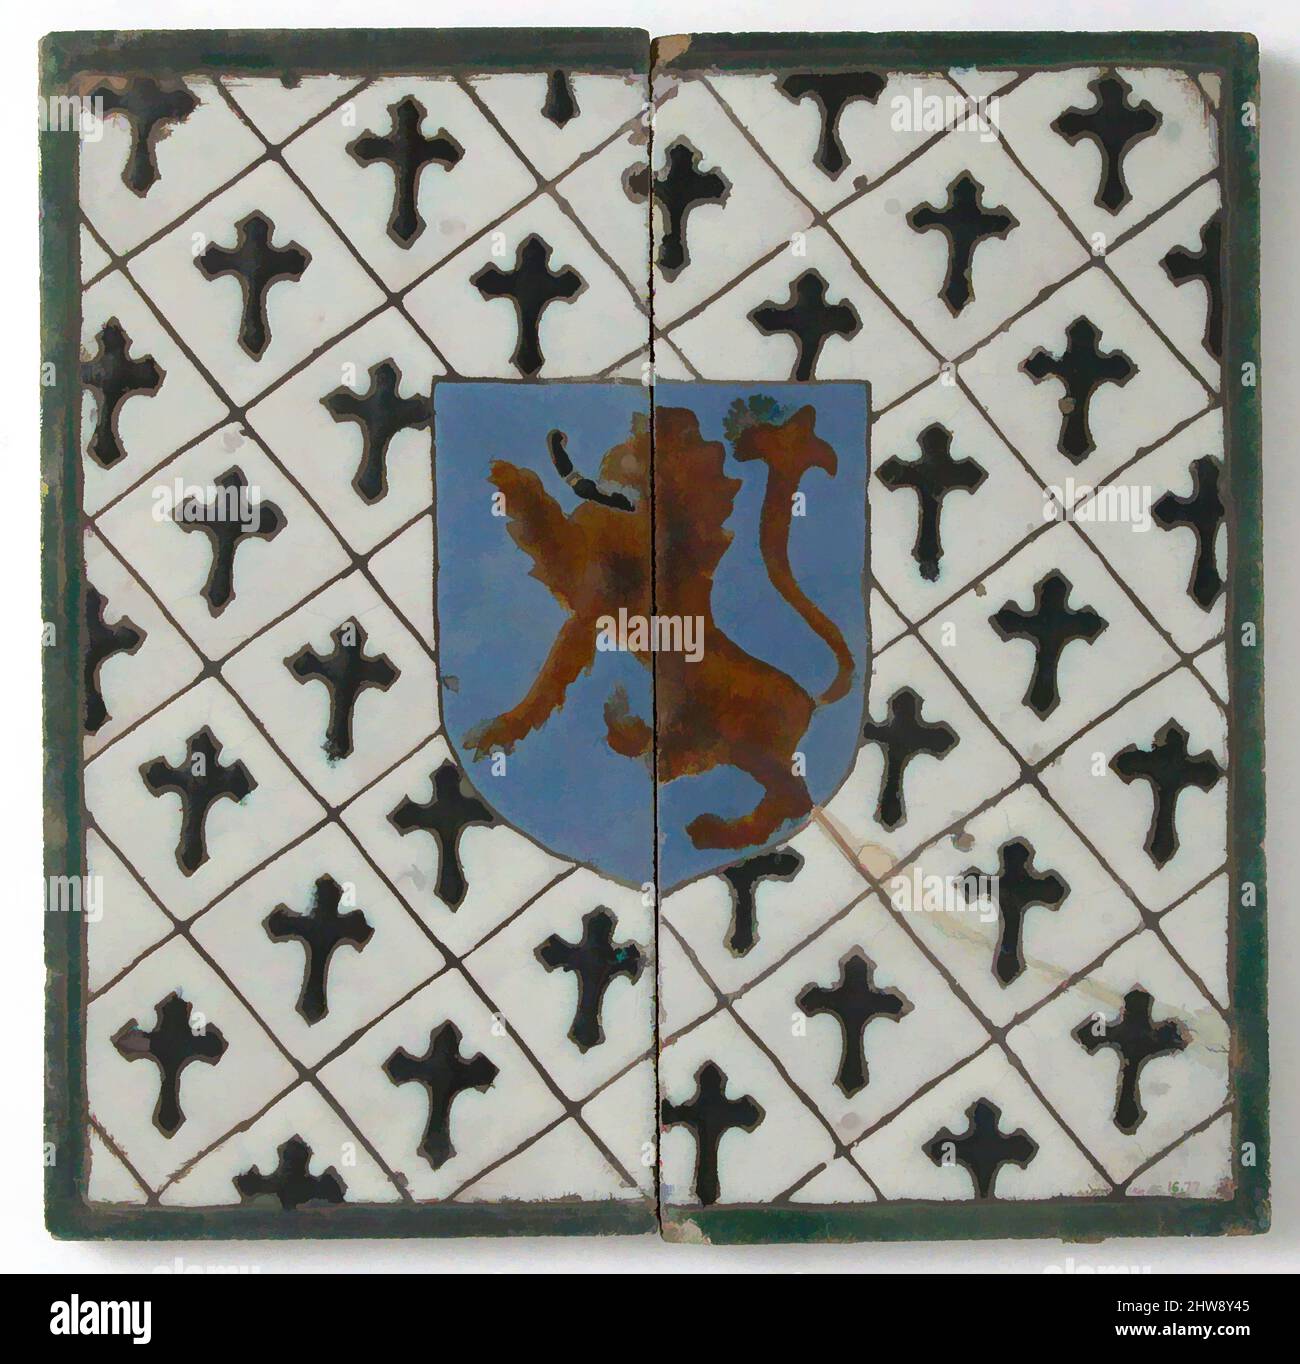 Art inspired by Tiles with a Lion on a Shield, late 1400s or early 1500s, Made in Seville, Spain, Spanish, Tin-glazed earthenware (cuerda seca technique), Overall: 11 1/8 x 5 9/16 x 5/8 in. (28.3 x 14.1 x 1.6 cm), Ceramics-Tiles, Classic works modernized by Artotop with a splash of modernity. Shapes, color and value, eye-catching visual impact on art. Emotions through freedom of artworks in a contemporary way. A timeless message pursuing a wildly creative new direction. Artists turning to the digital medium and creating the Artotop NFT Stock Photo